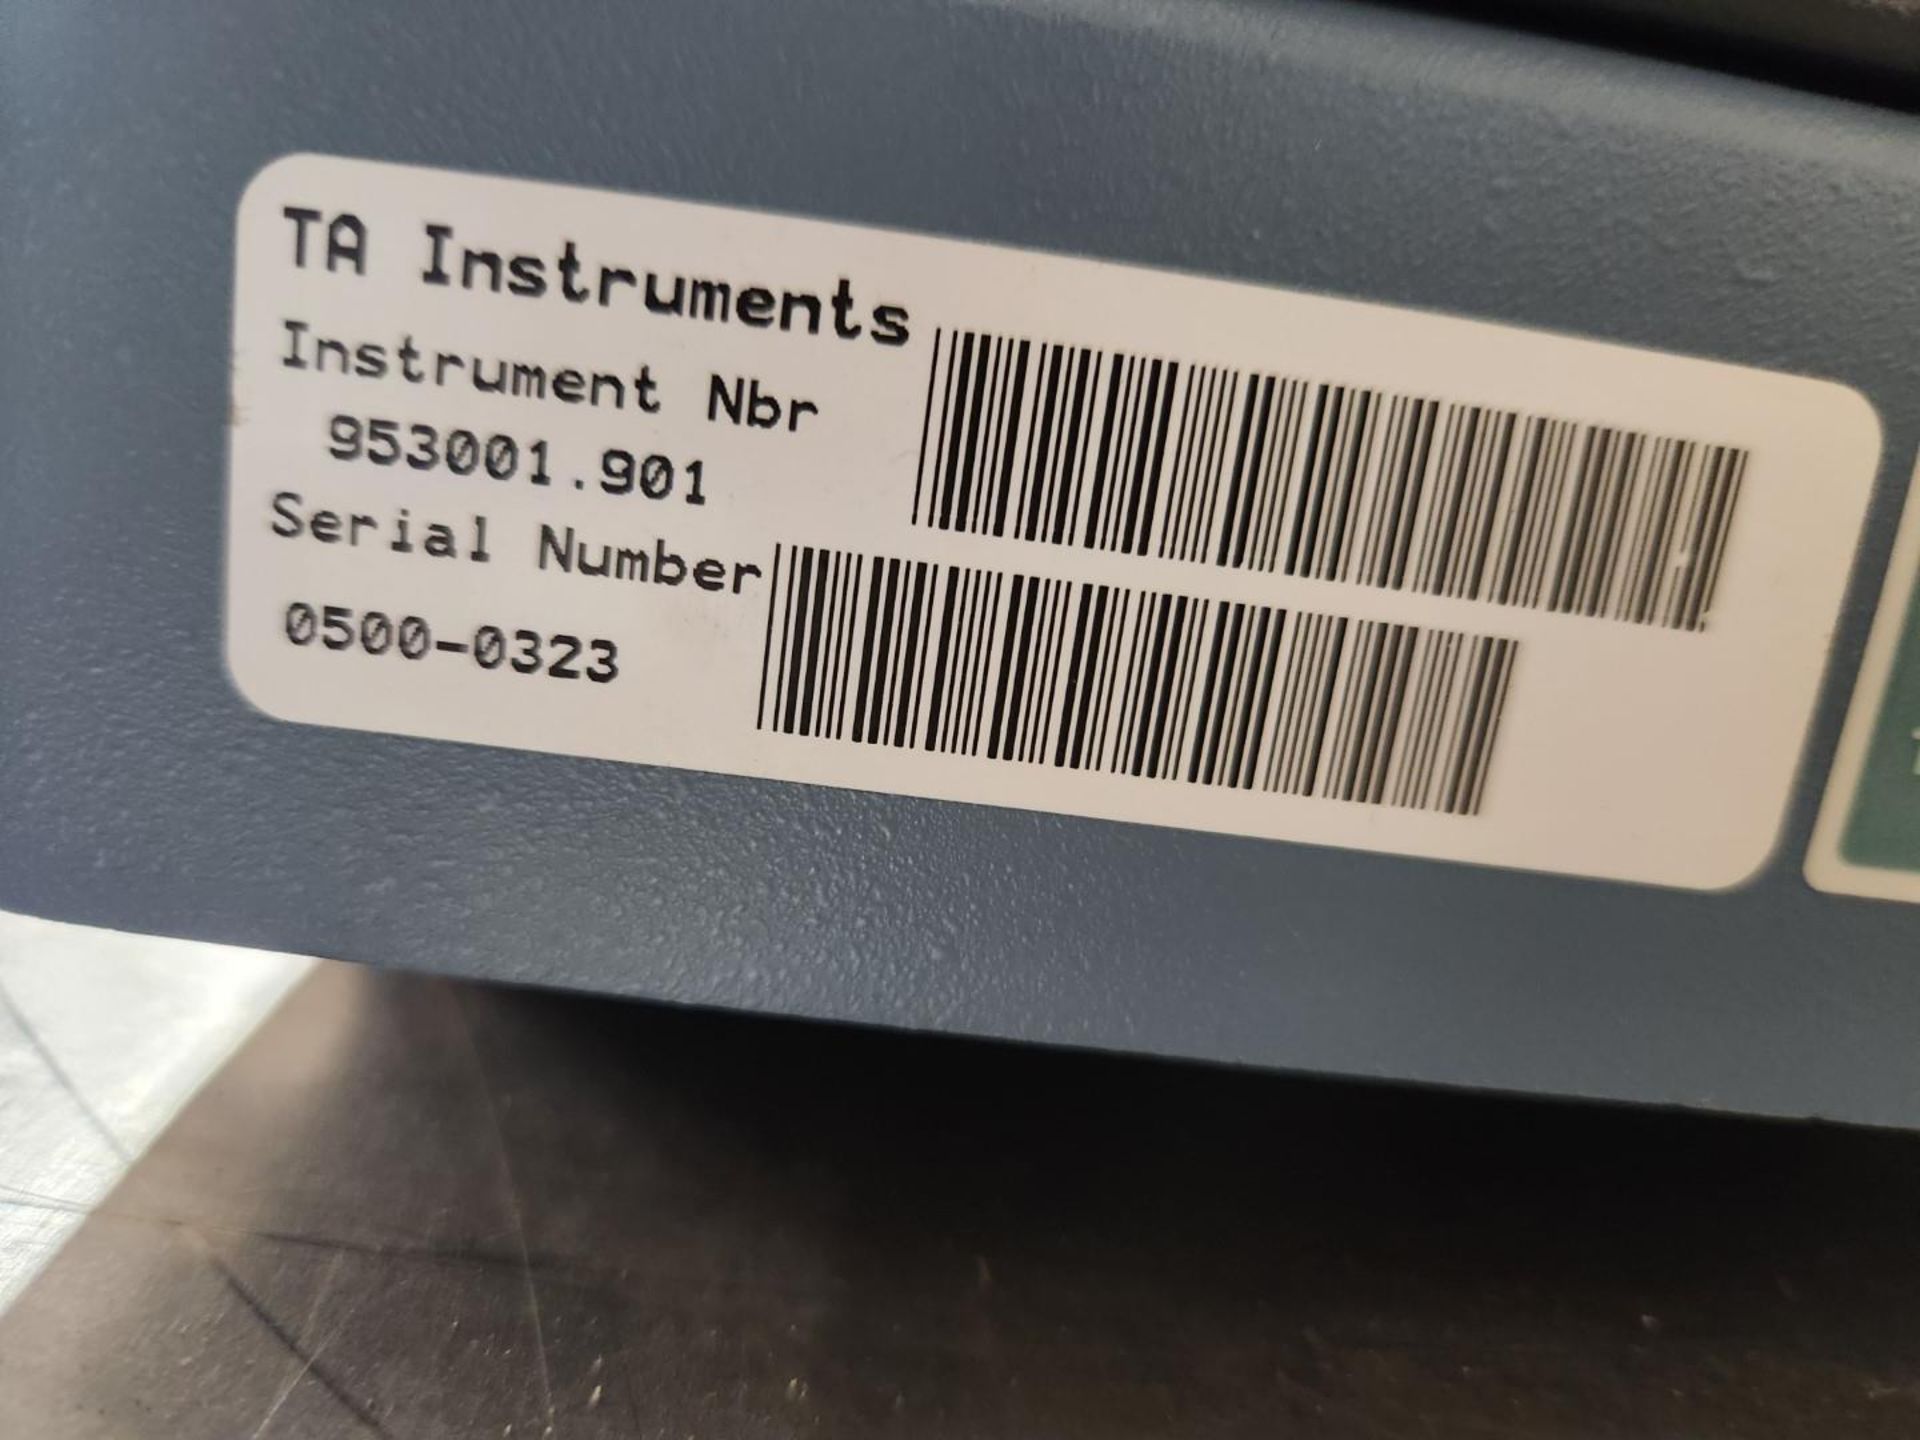 TA Insturments Thermogravimetric Analyzer, model 953001.901 TGA Q500, with TGA-04 heat exchanger and - Image 7 of 7